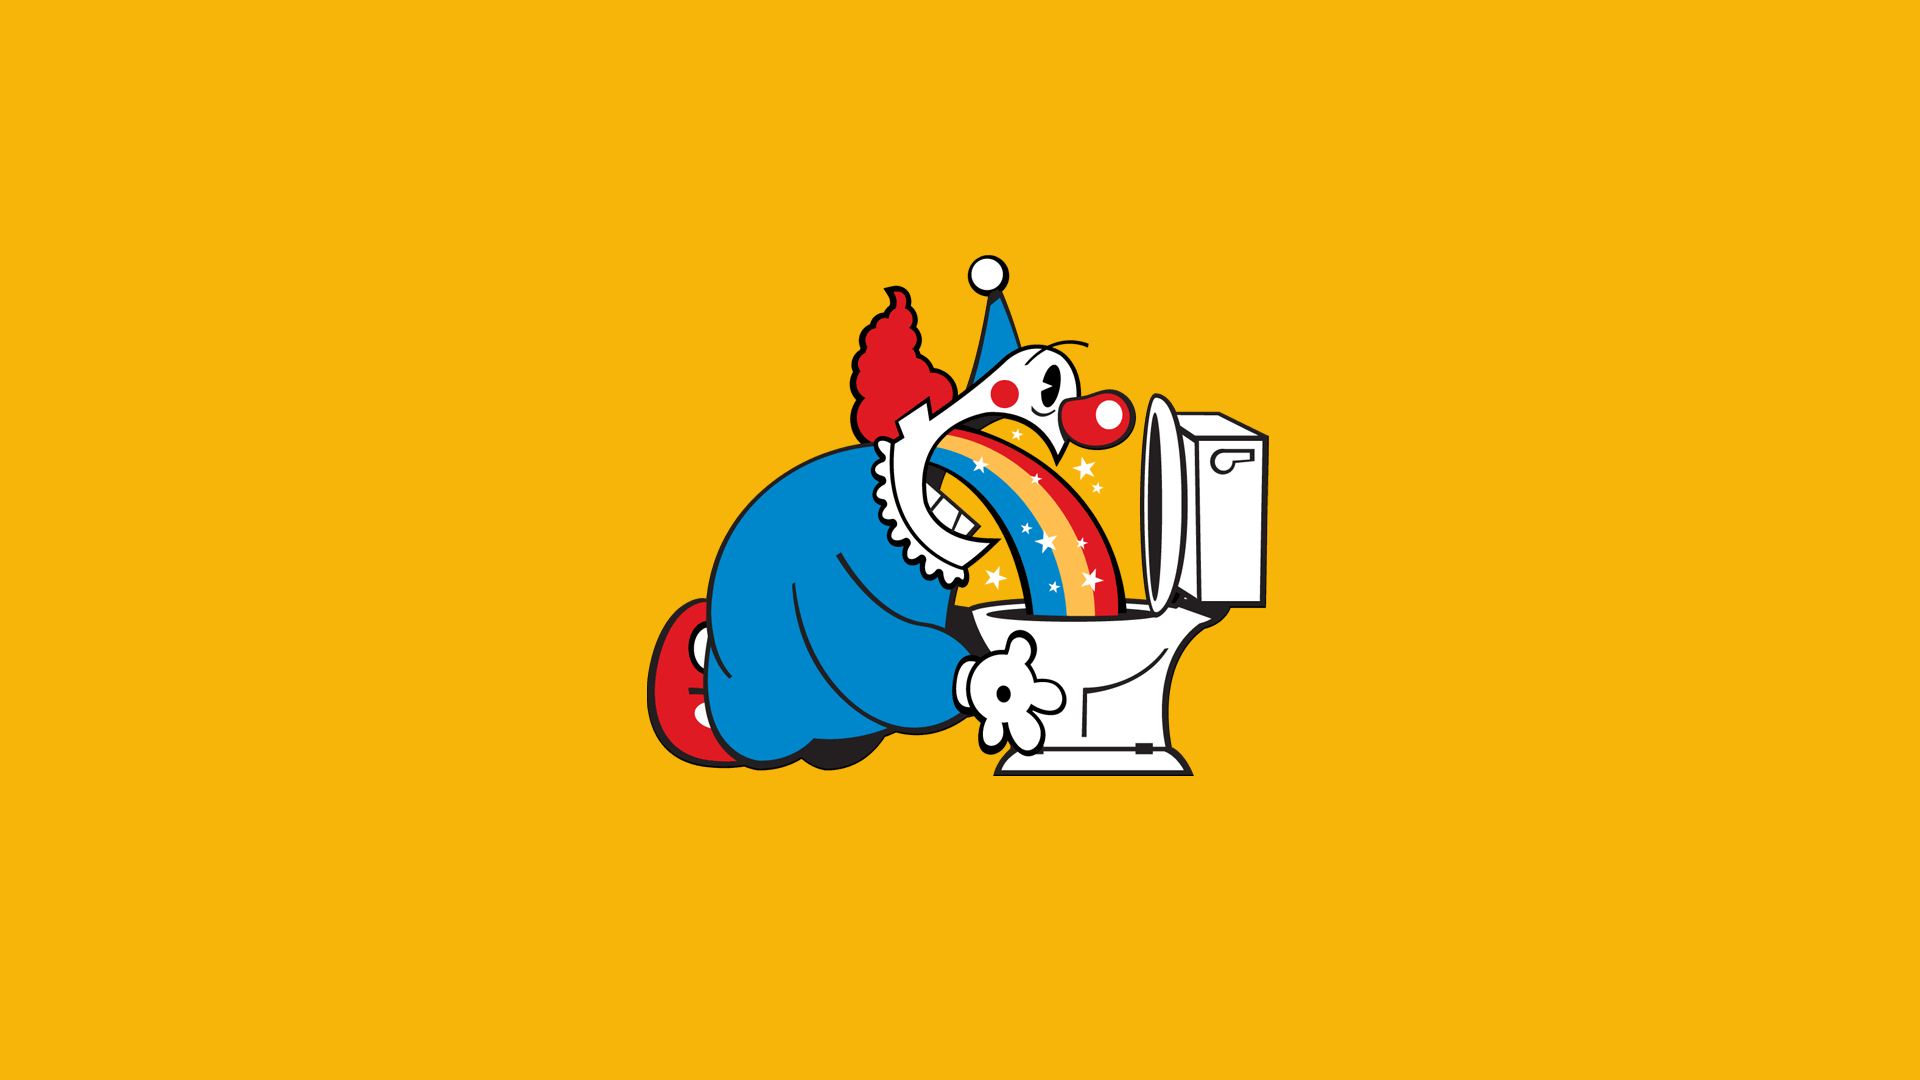 General 1920x1080 primary colors clown rainbows yellow toilets yellow background simple background